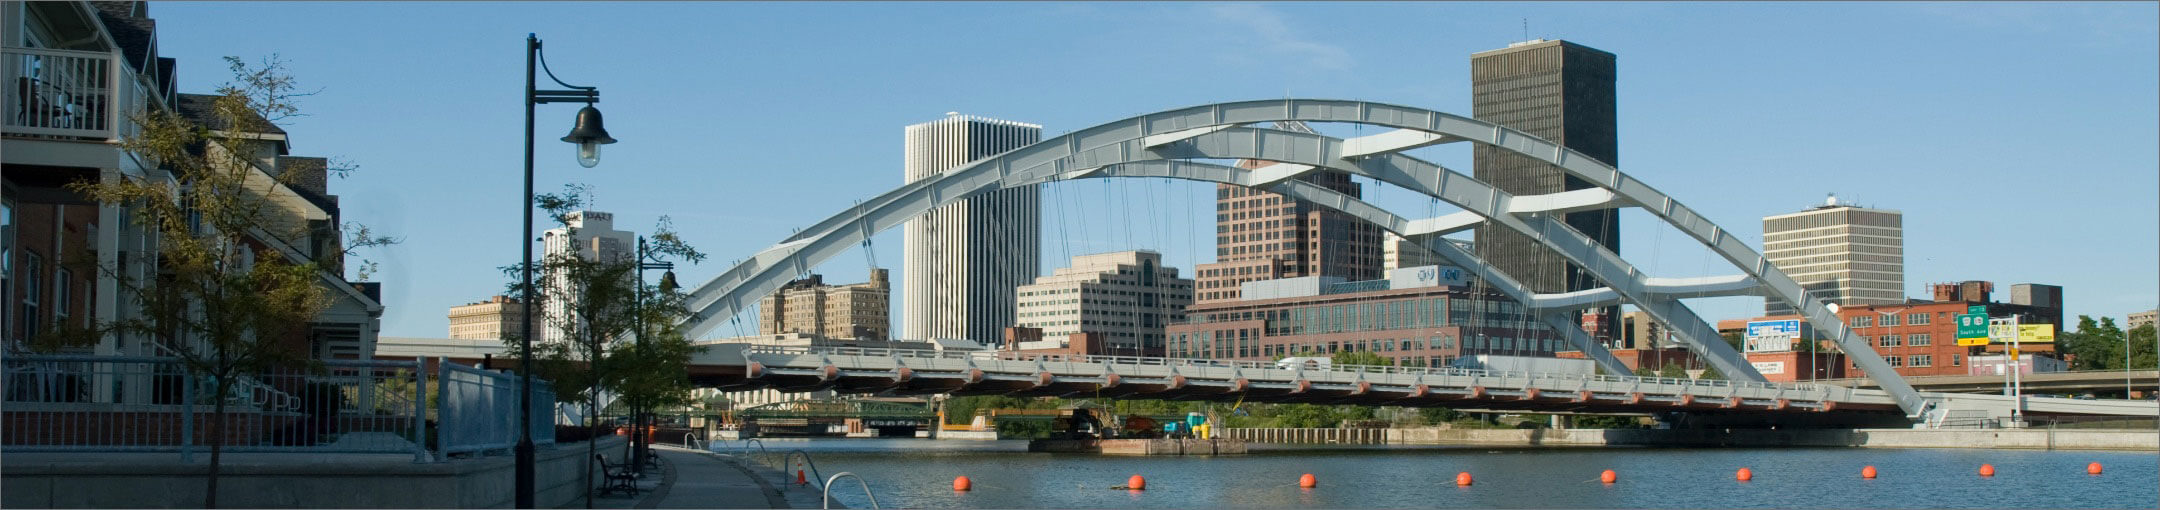 A bridge with the Rochester skyline in the background.